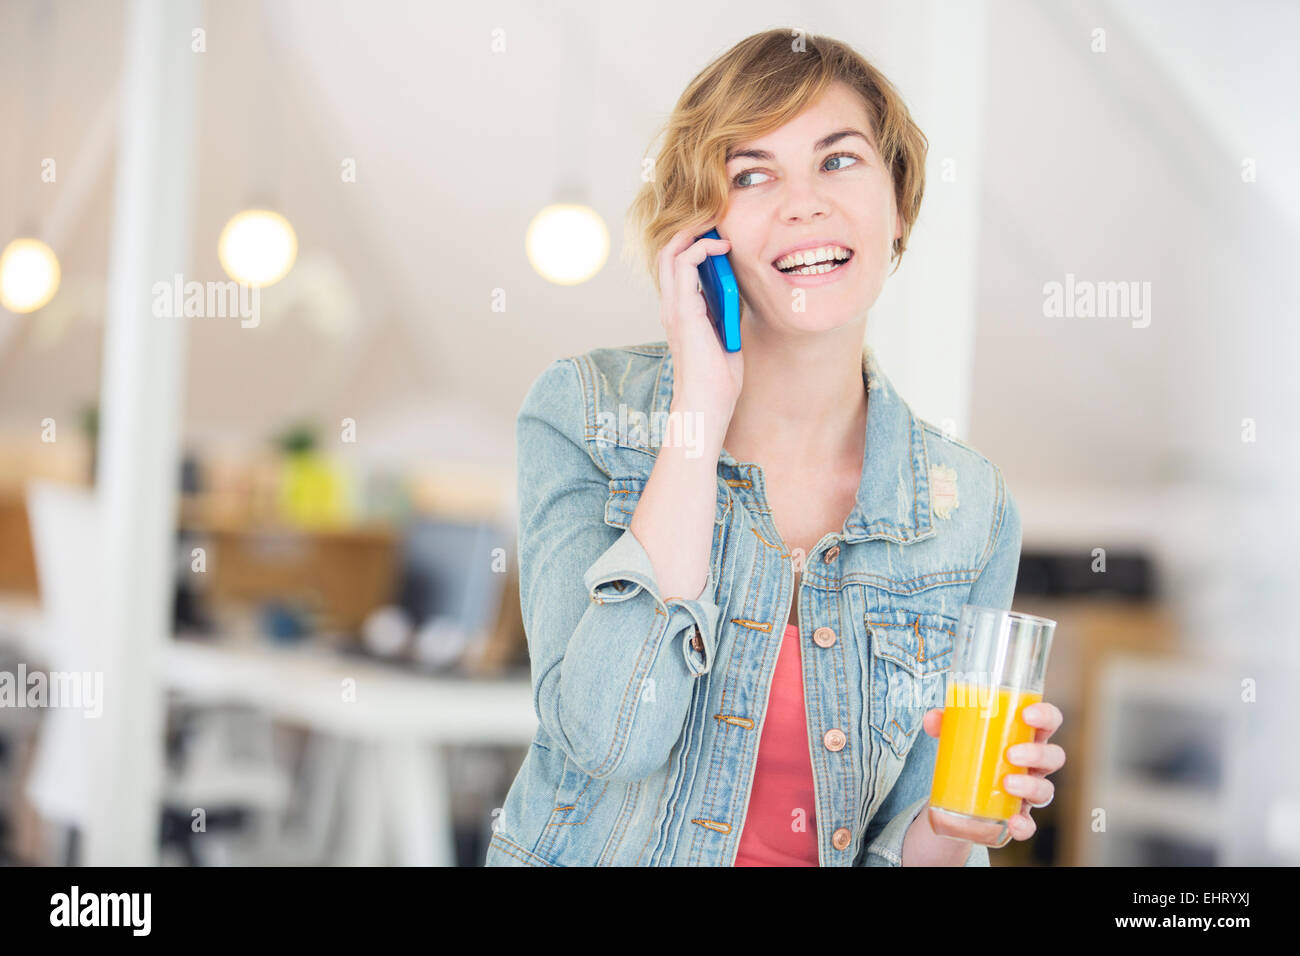 Office worker talking on phone and holding glass of juice Stock Photo